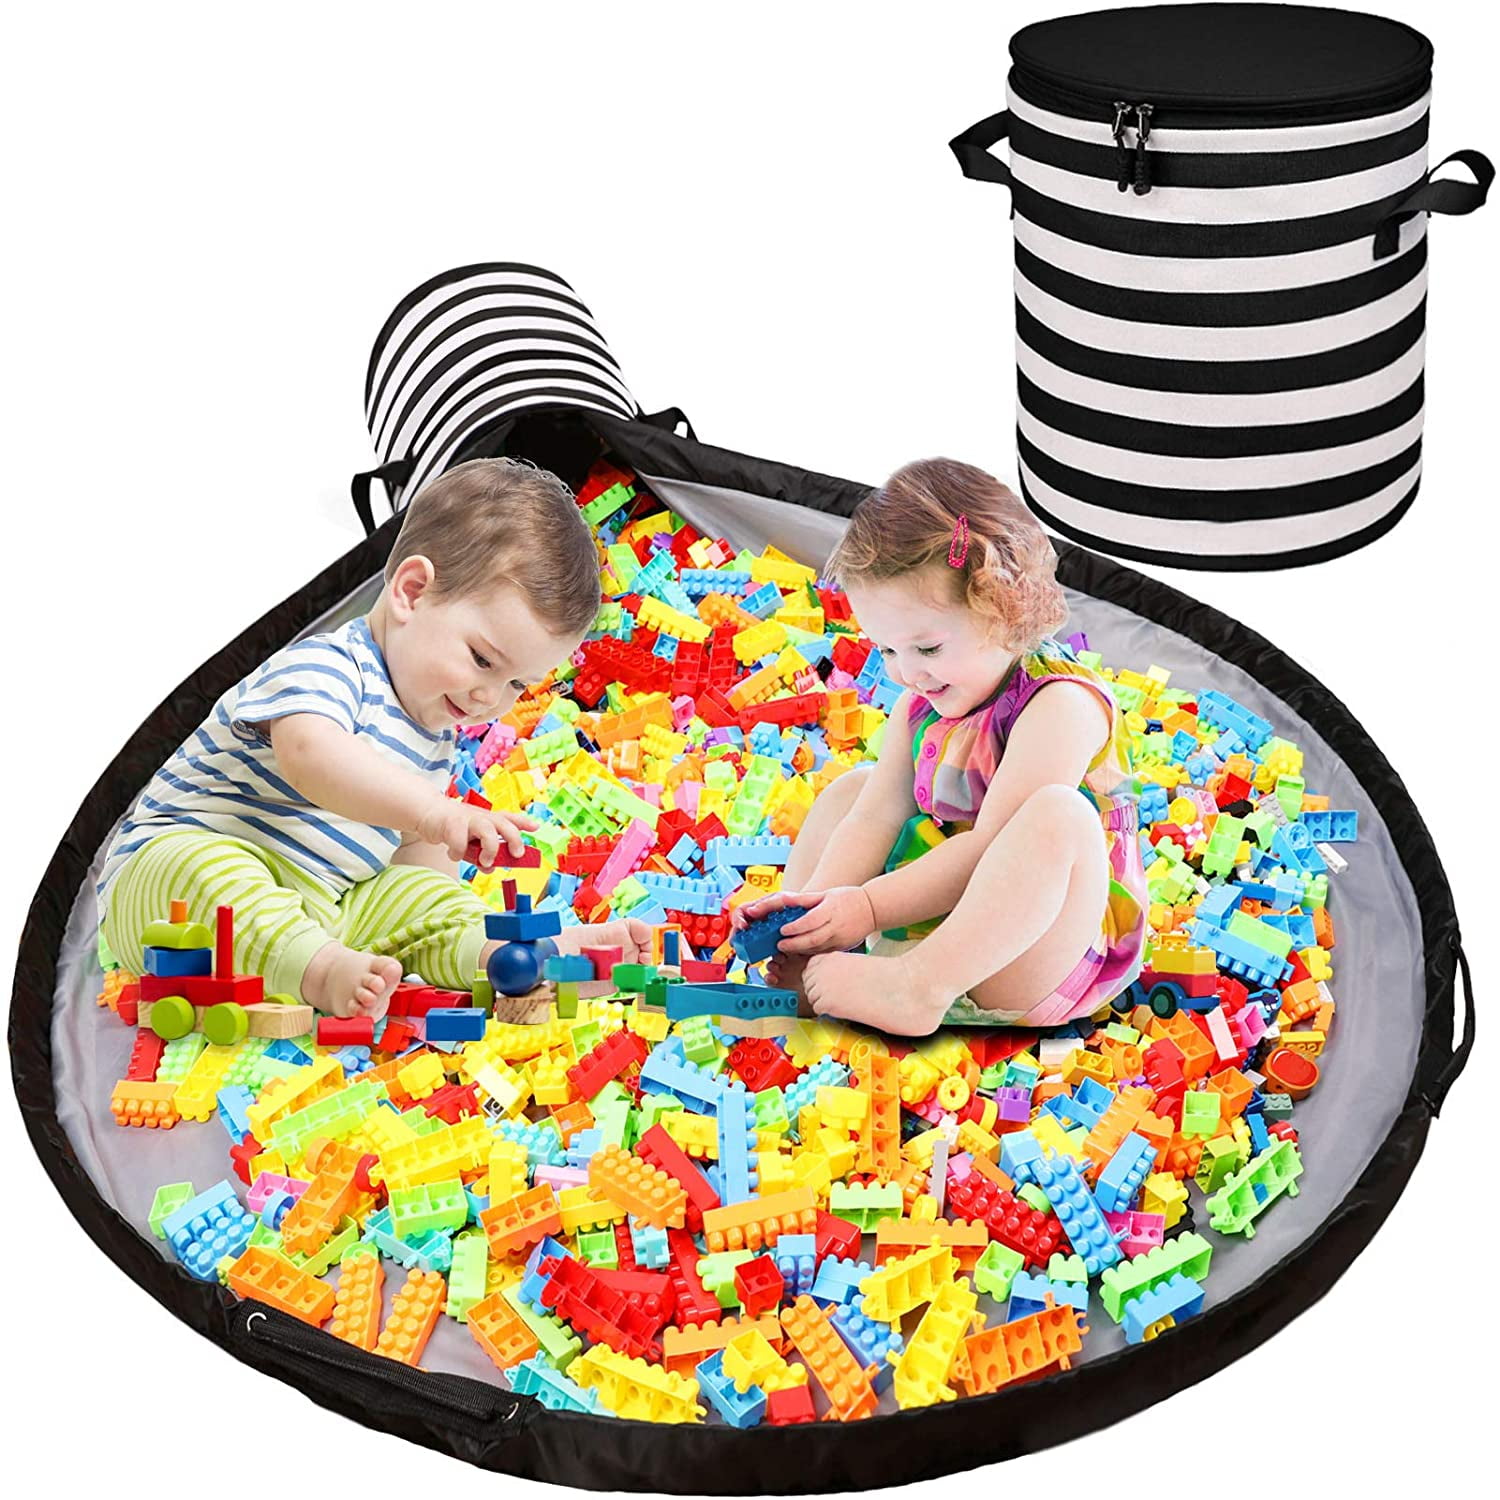 Details about   Storage Container Play Mat Kids Toy Storage Bag Basket Integrated Toy Practical 